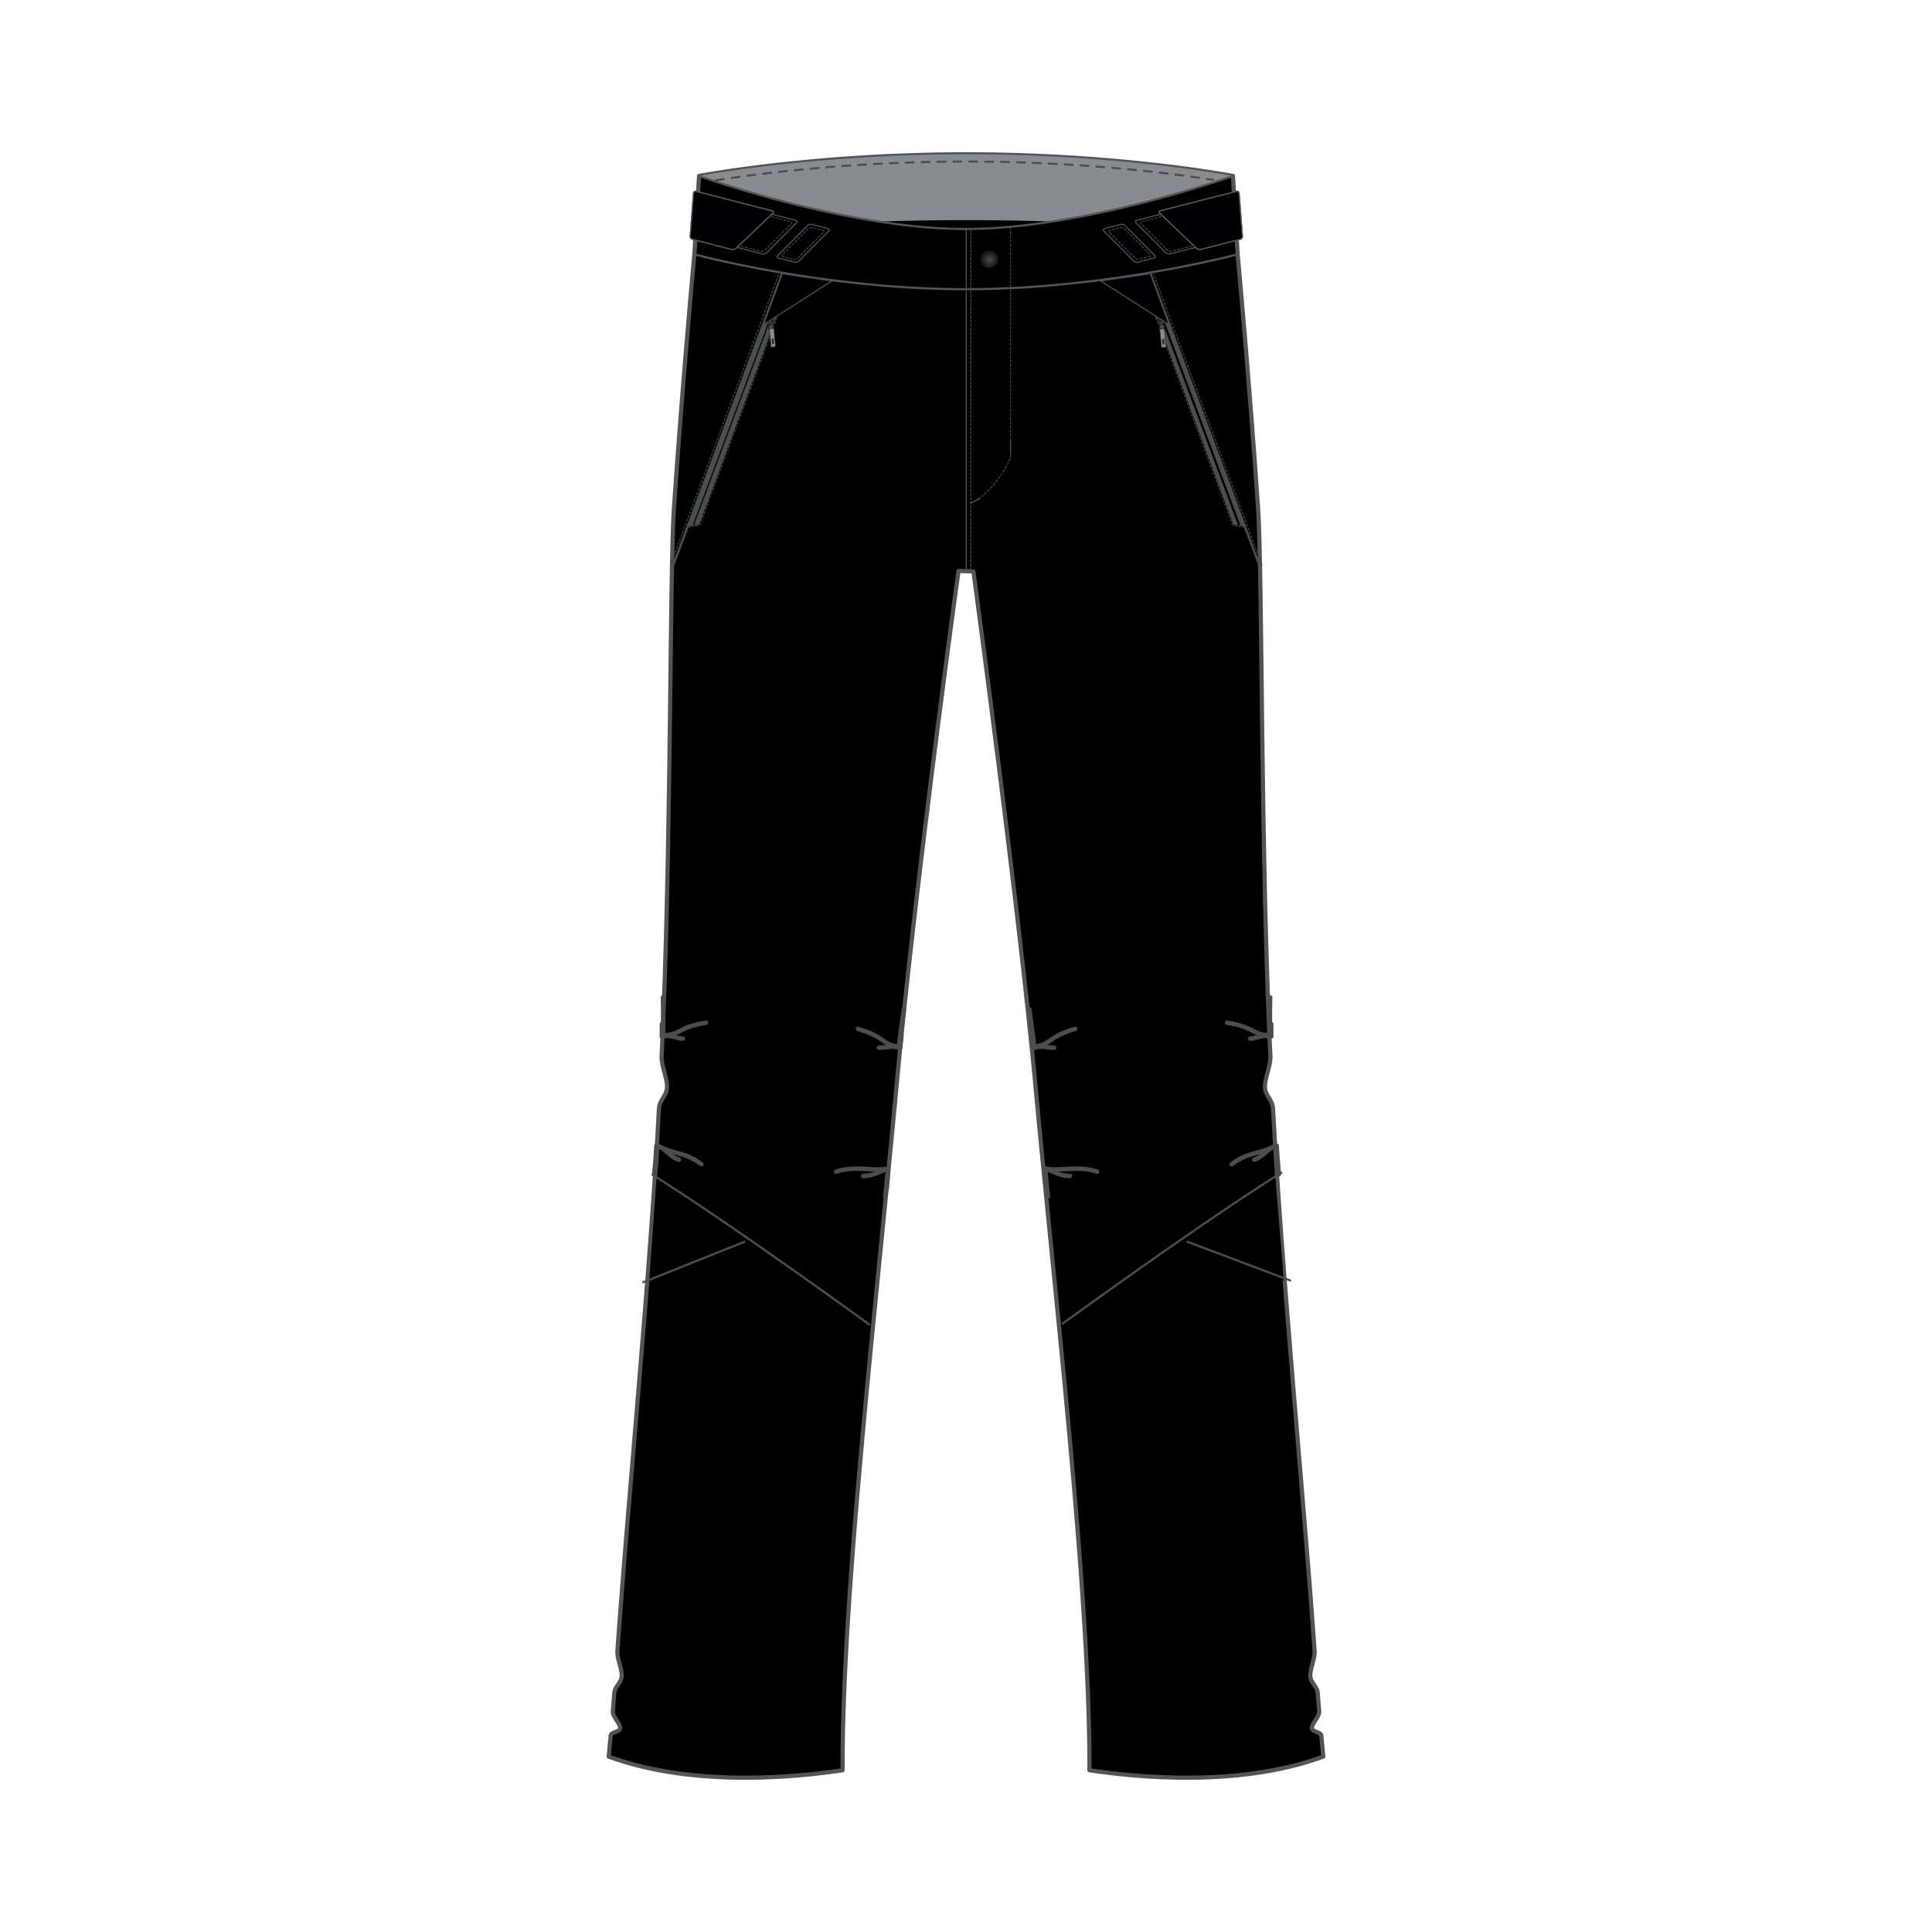 Kids’ Cross-country Skiing Overtrousers XC S OVERP 150 - Black 2/6